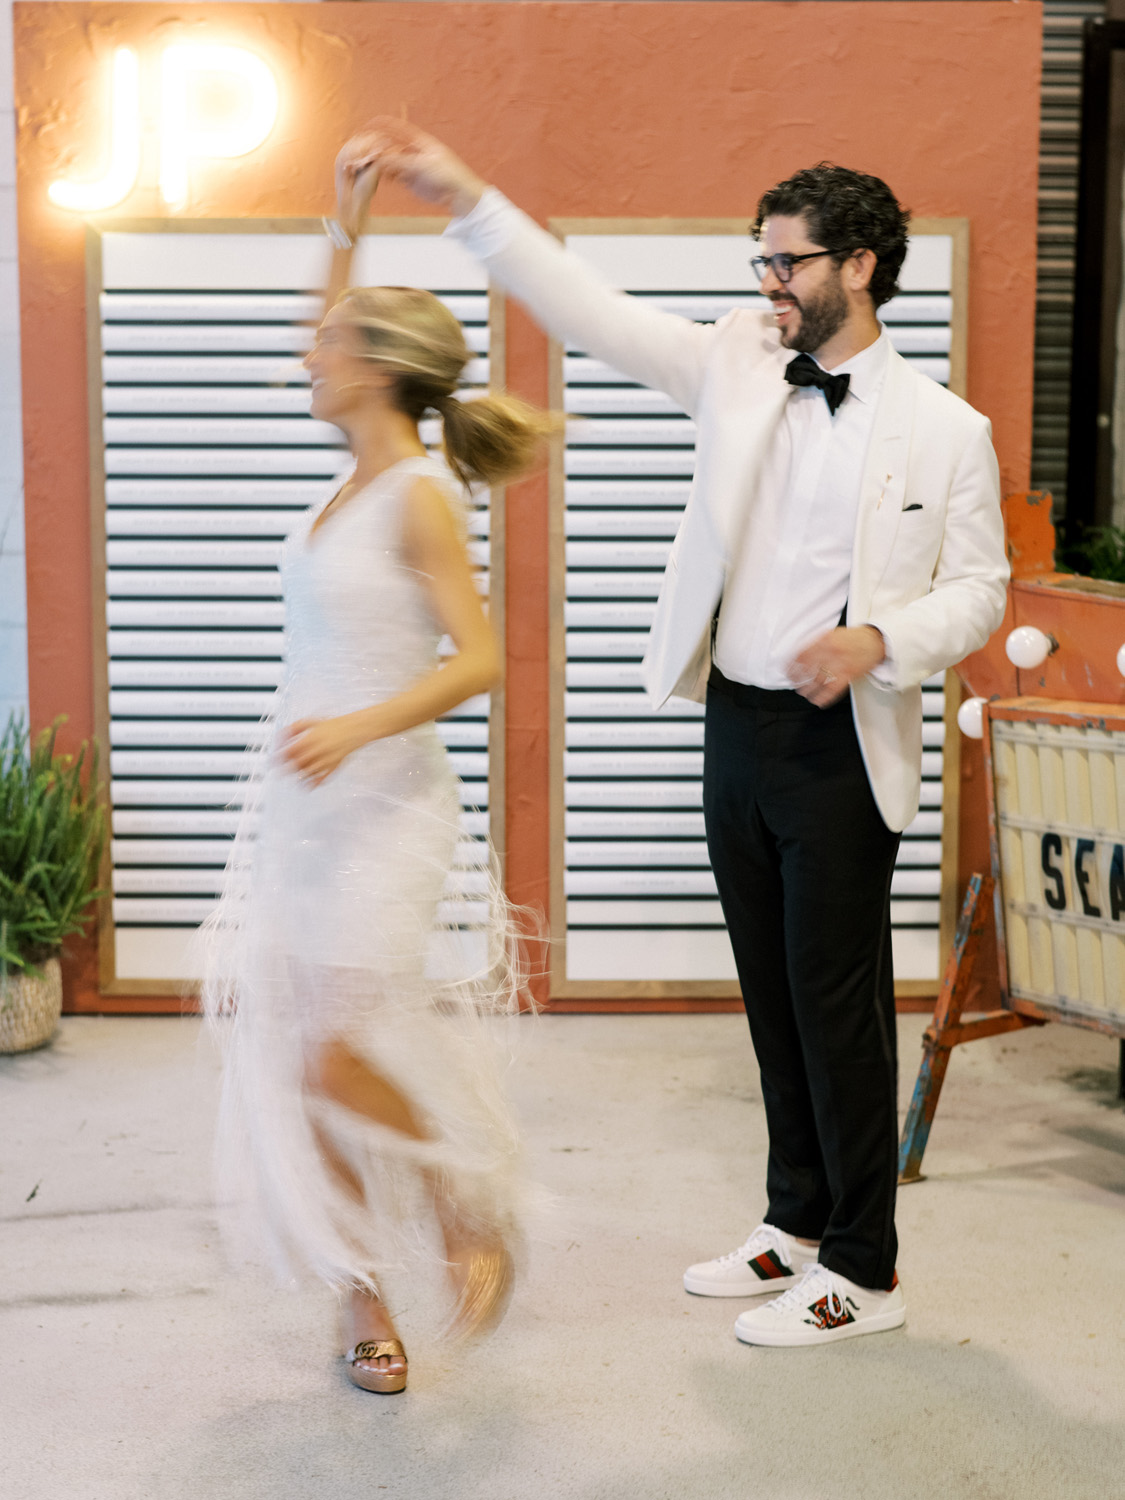 party dress and white tux for wedding reception